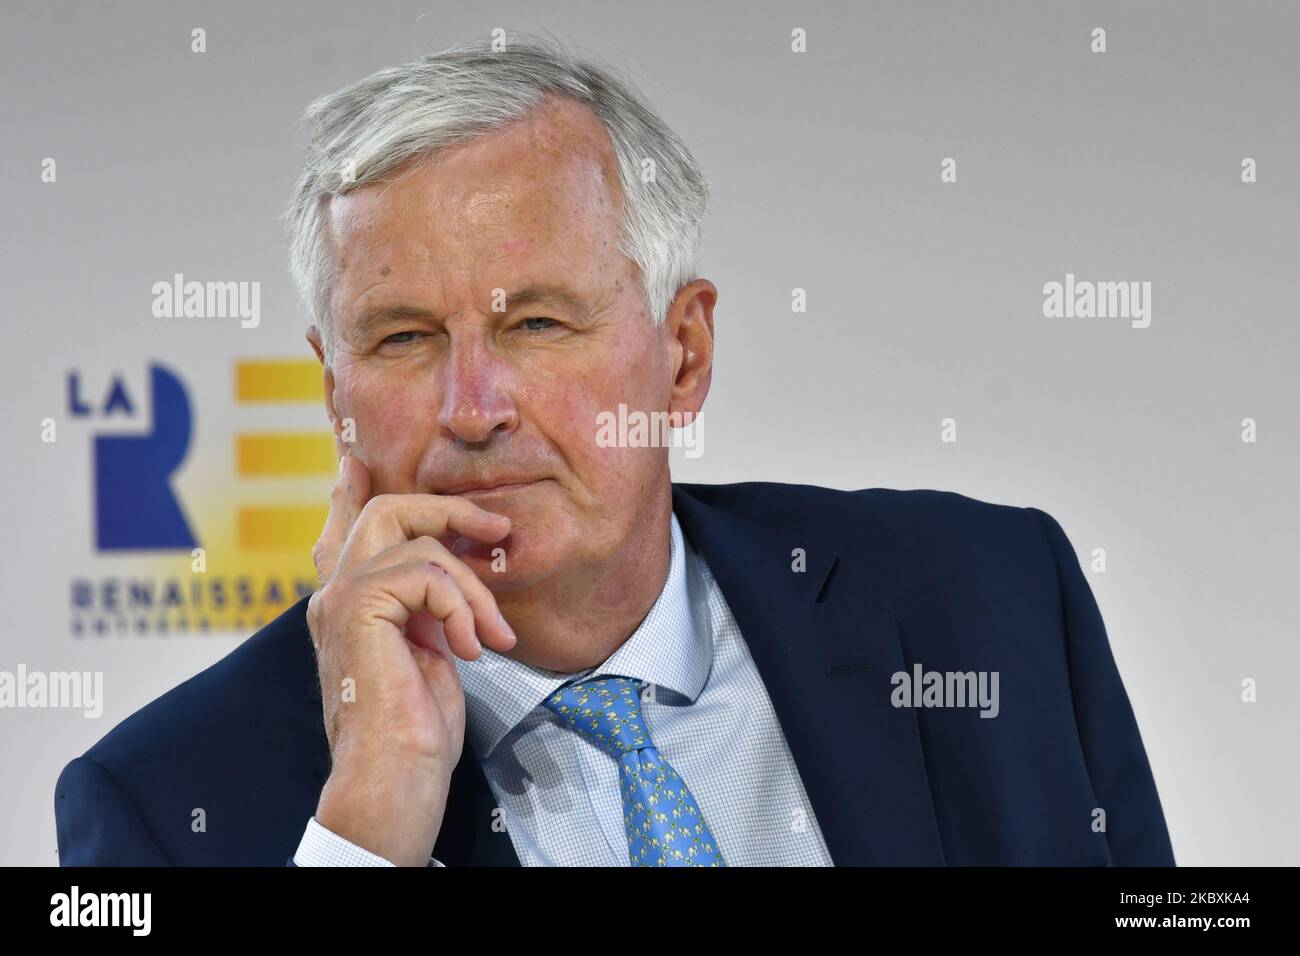 EU's Brexit negotiator Michel Barnier attends at the meeting of French employers' association Medef themed 'The Renaissance of French Companies' on August 26, 2020, in Paris, France. (Photo by Daniel Pier/NurPhoto) Stock Photo